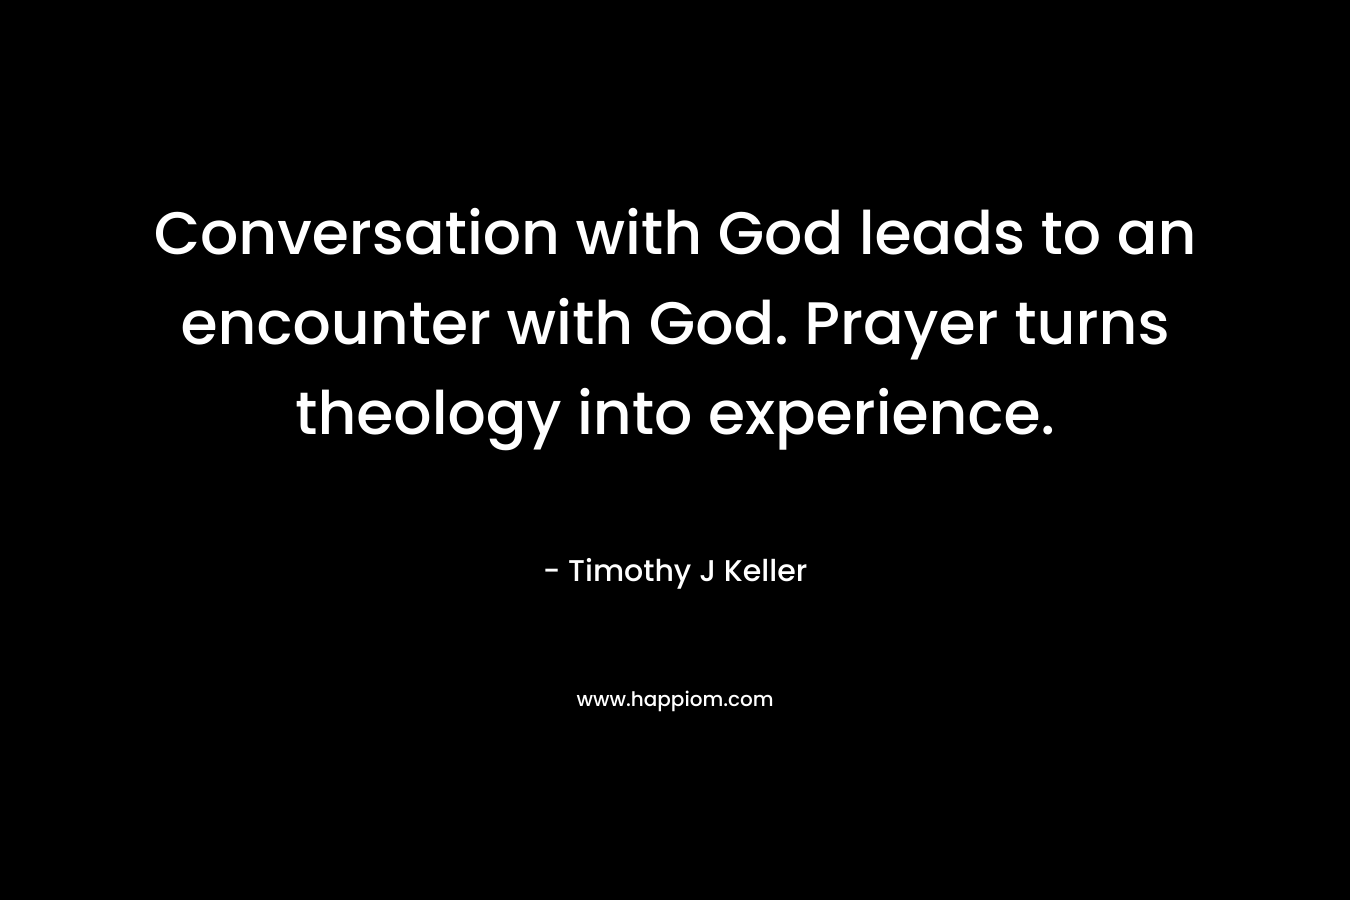 Conversation with God leads to an encounter with God. Prayer turns theology into experience.